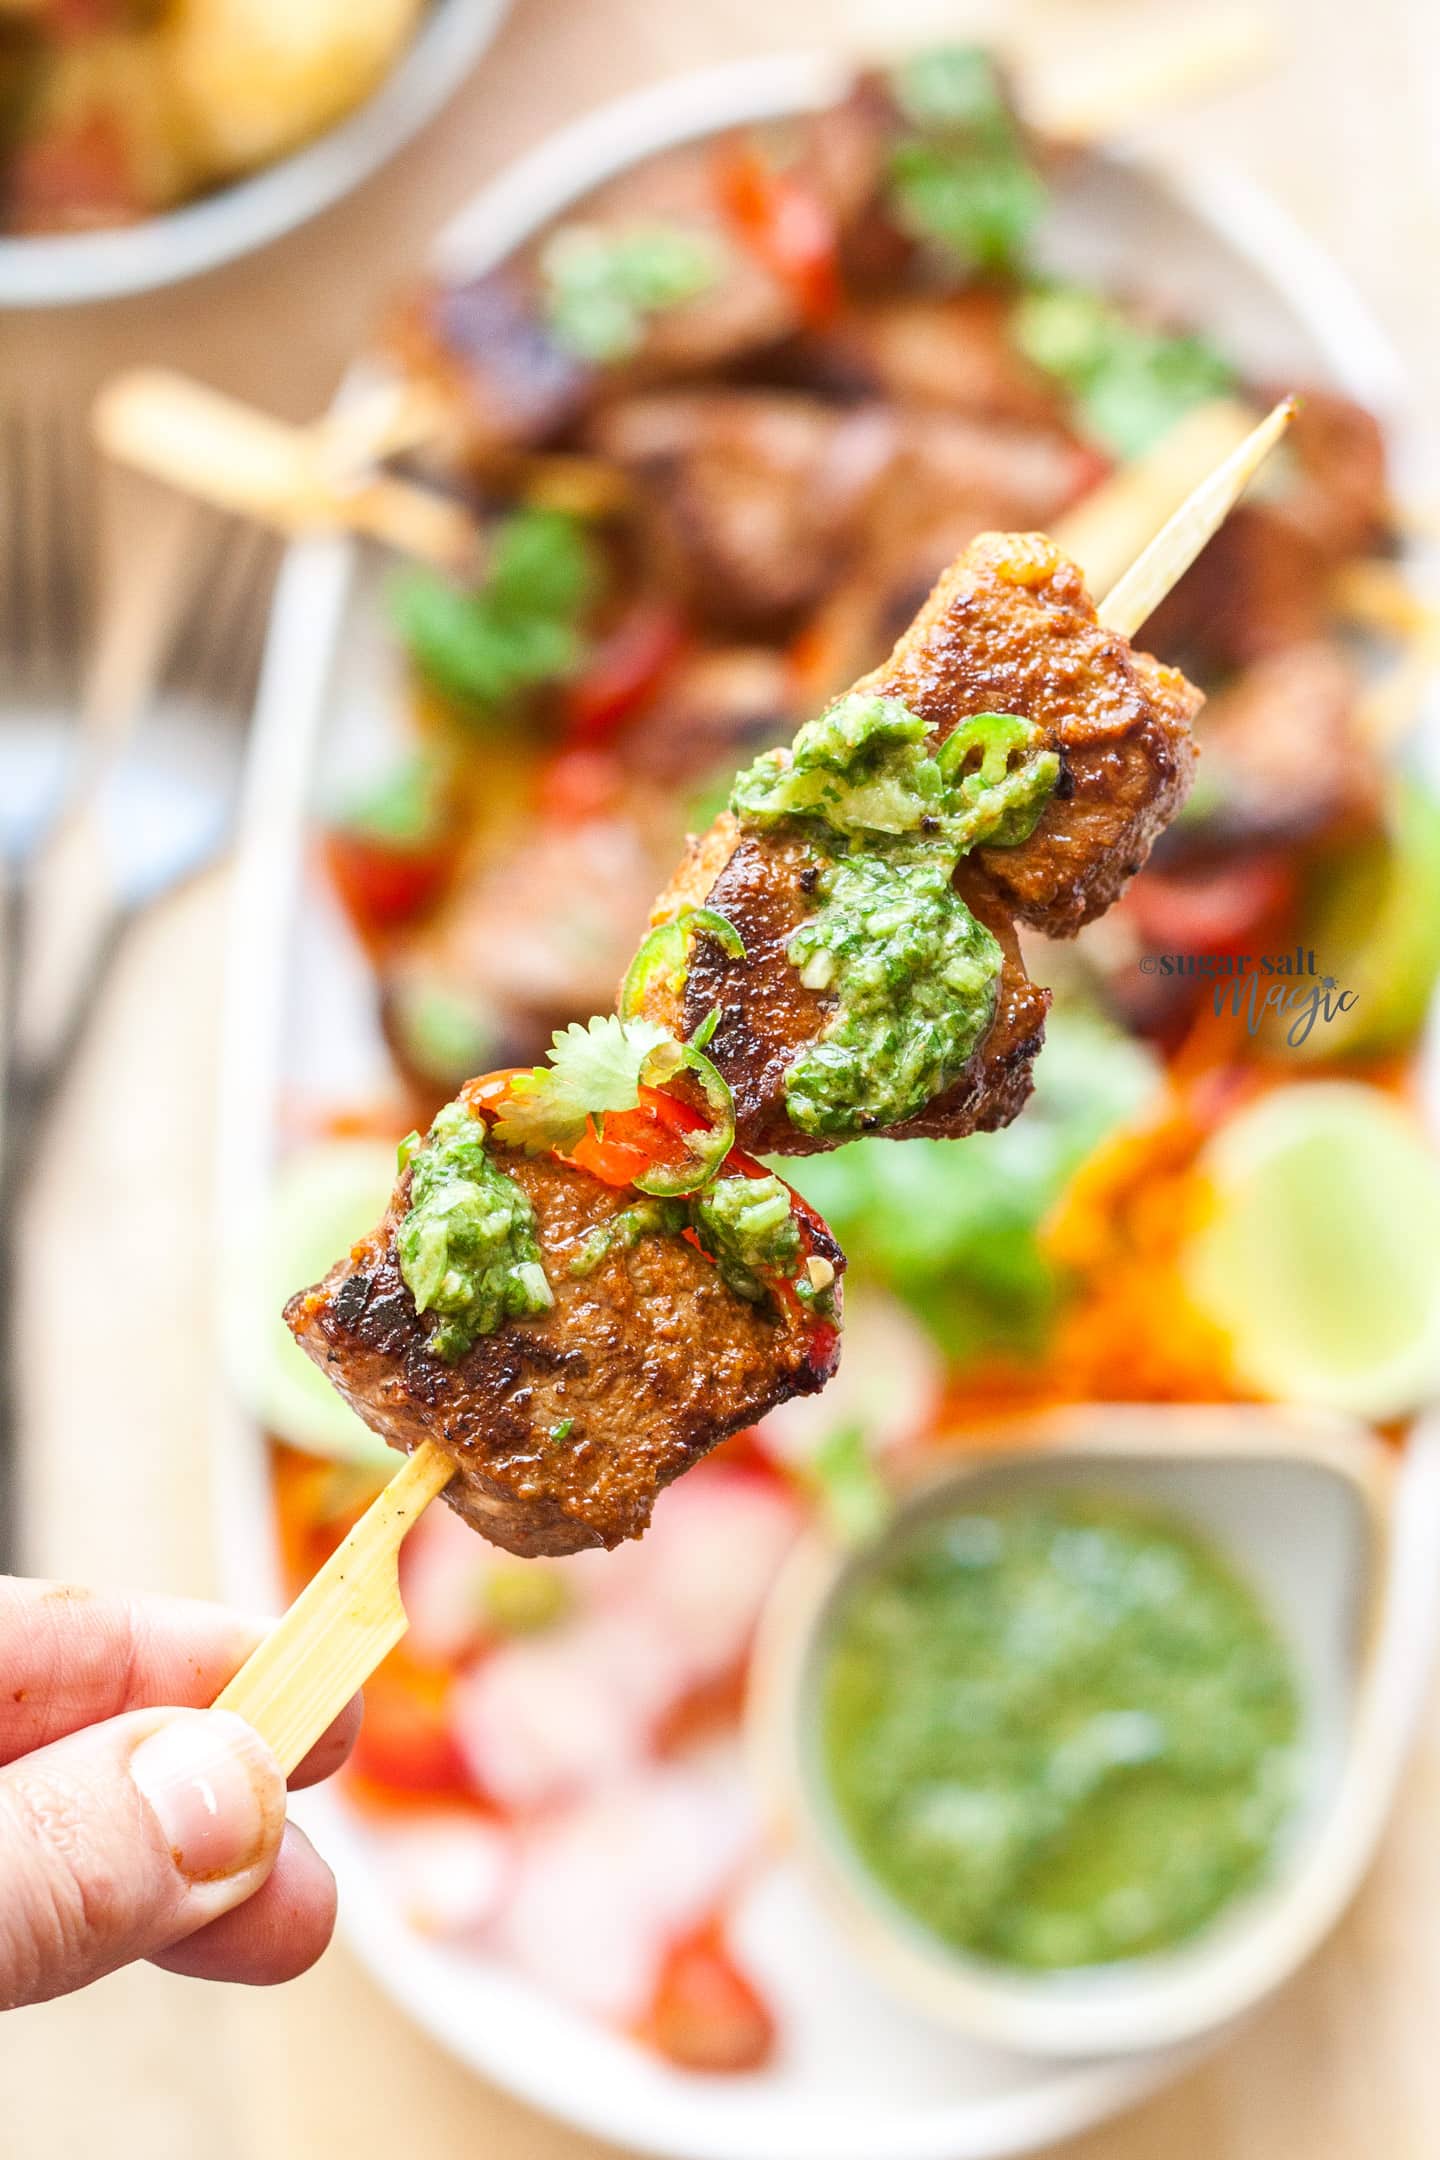 A beef shishkebab with green sauce on it.